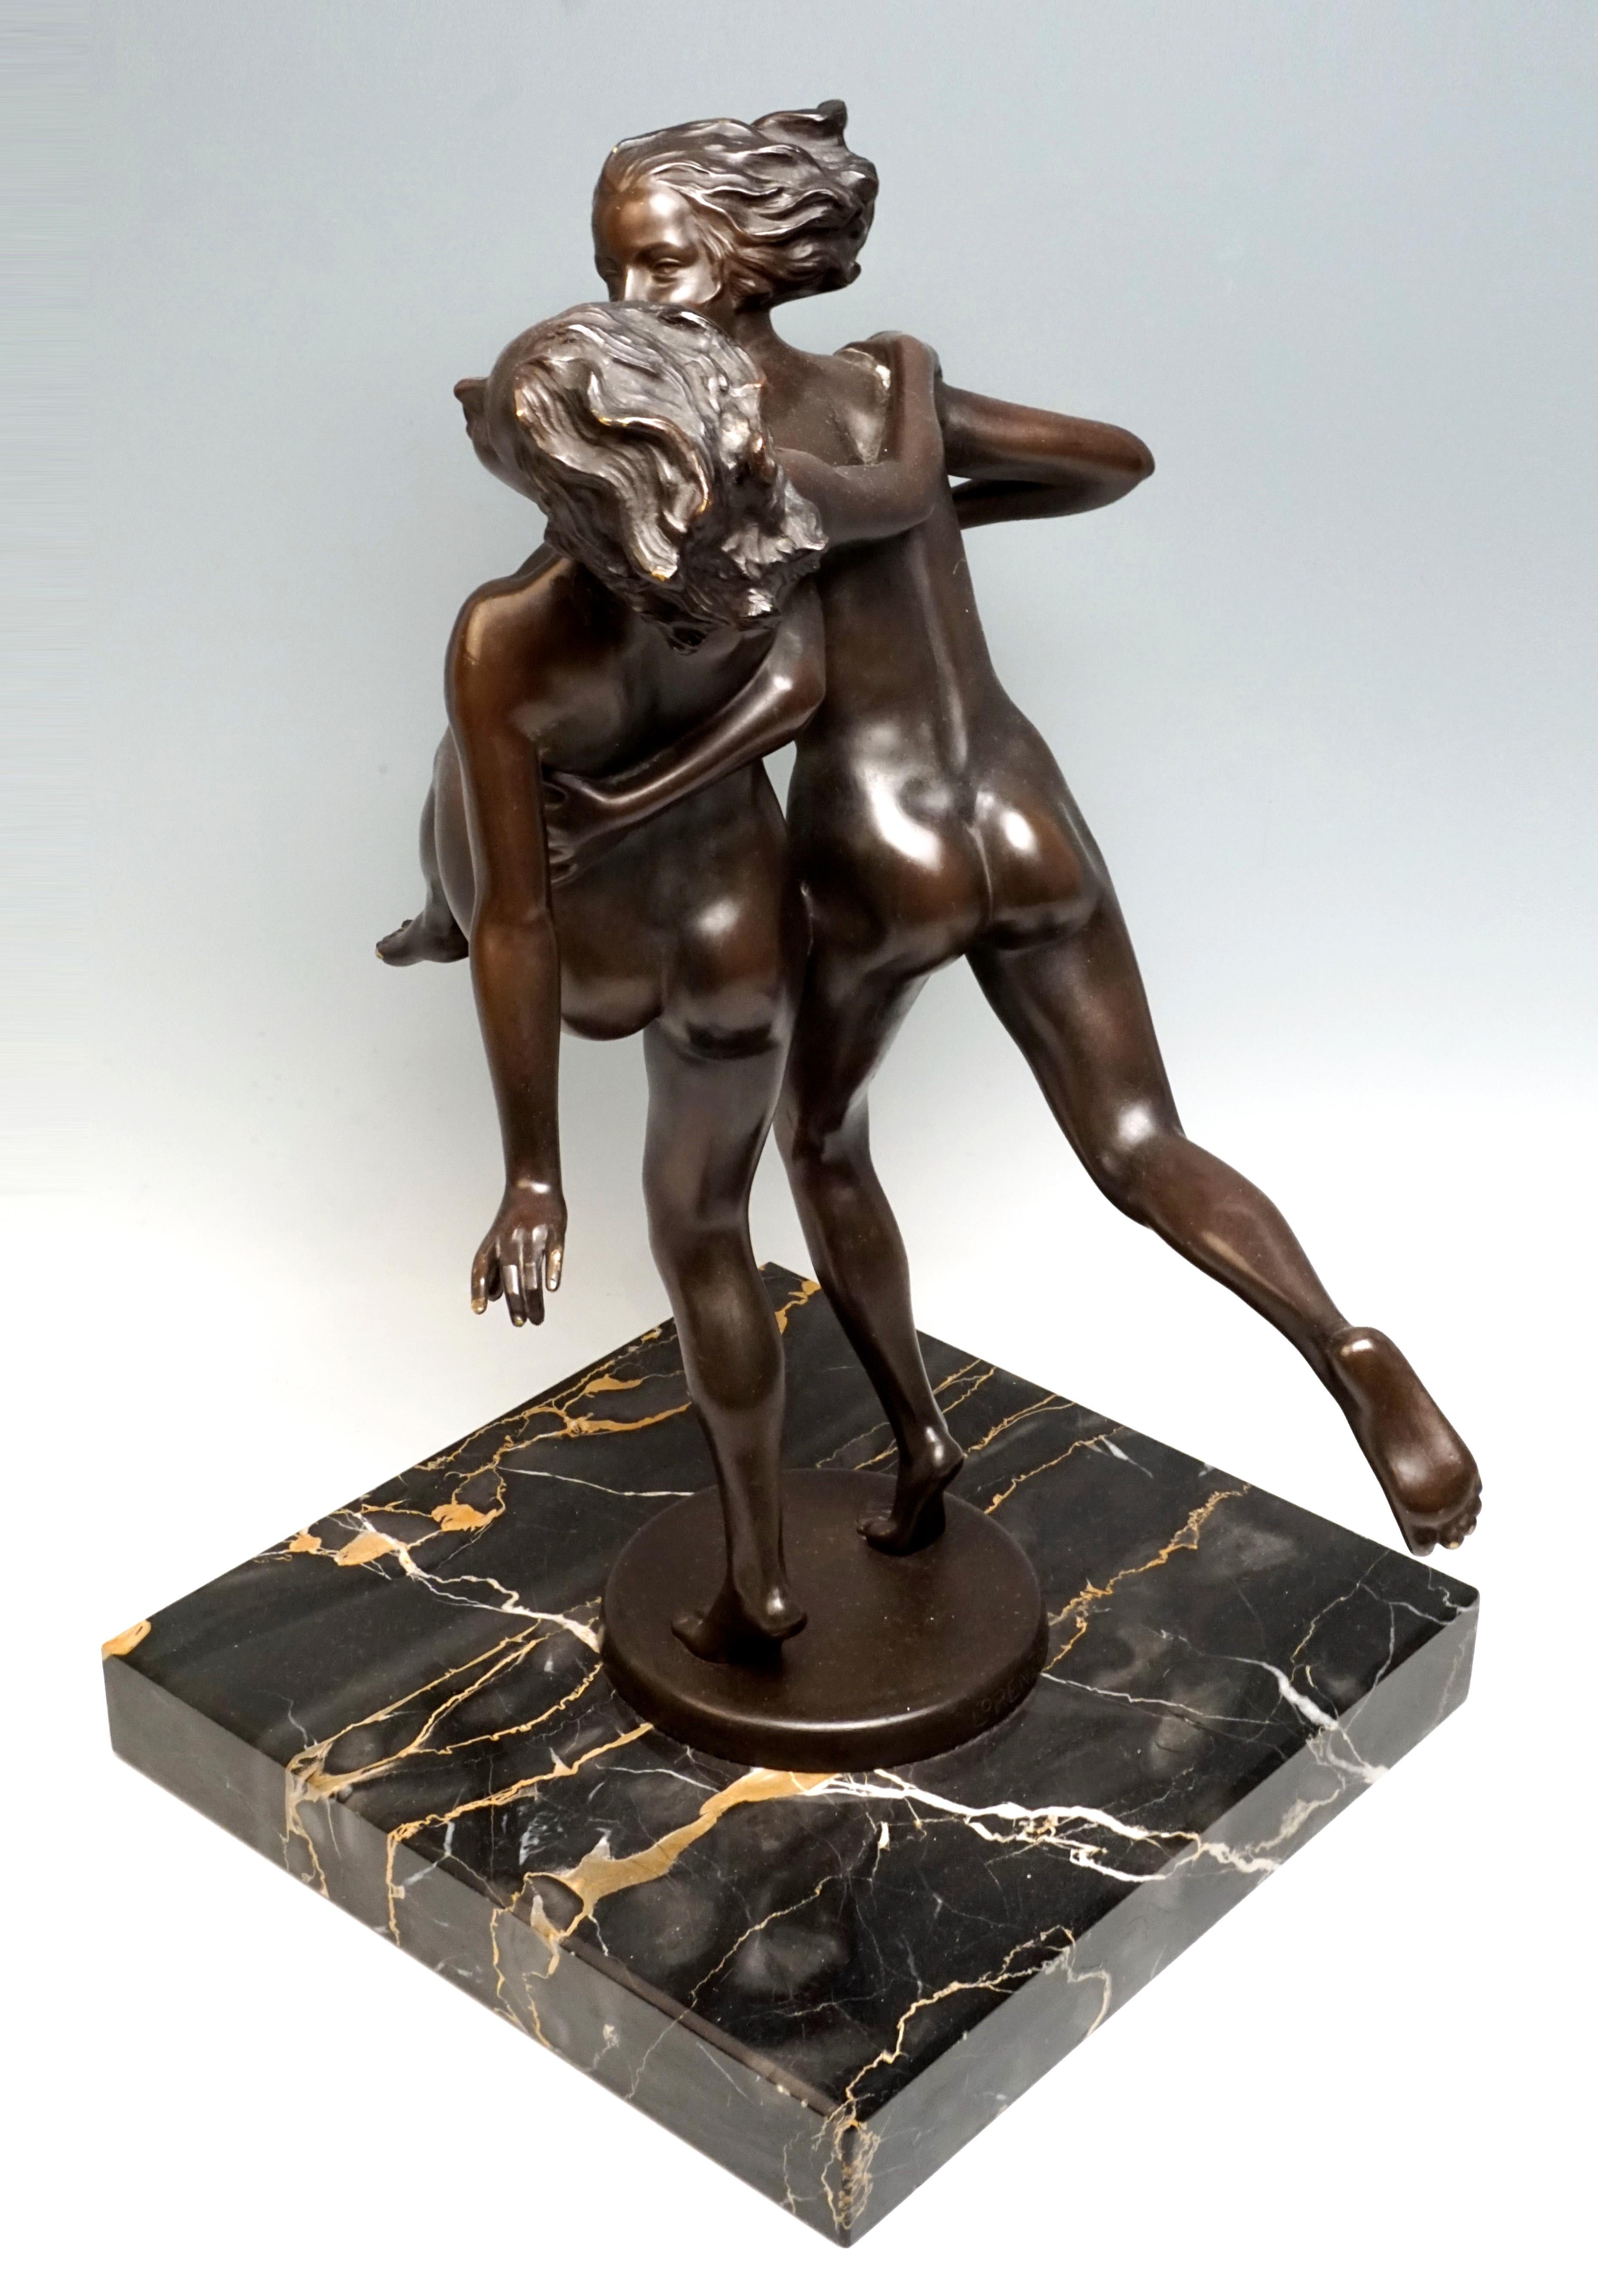 Another excellent piece of Viennese bronze art

Two unclothed young dancers embrace each other at the hips and shoulders and dance exuberantly, one girl inclined slightly backwards, the left leg raised forward, the other girl slightly inclined